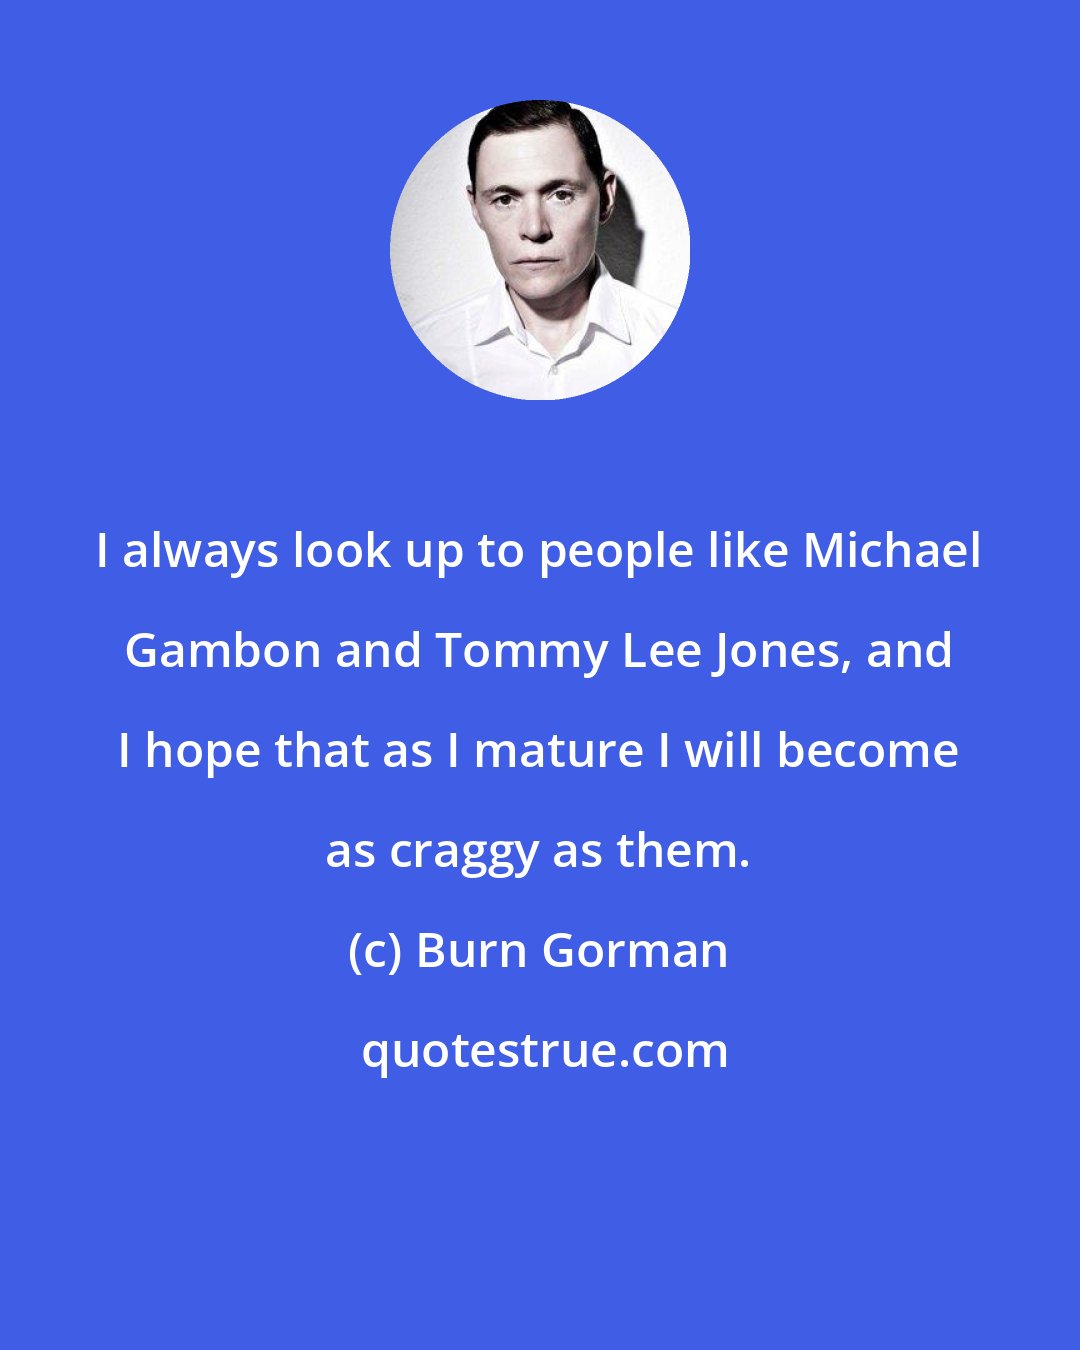 Burn Gorman: I always look up to people like Michael Gambon and Tommy Lee Jones, and I hope that as I mature I will become as craggy as them.